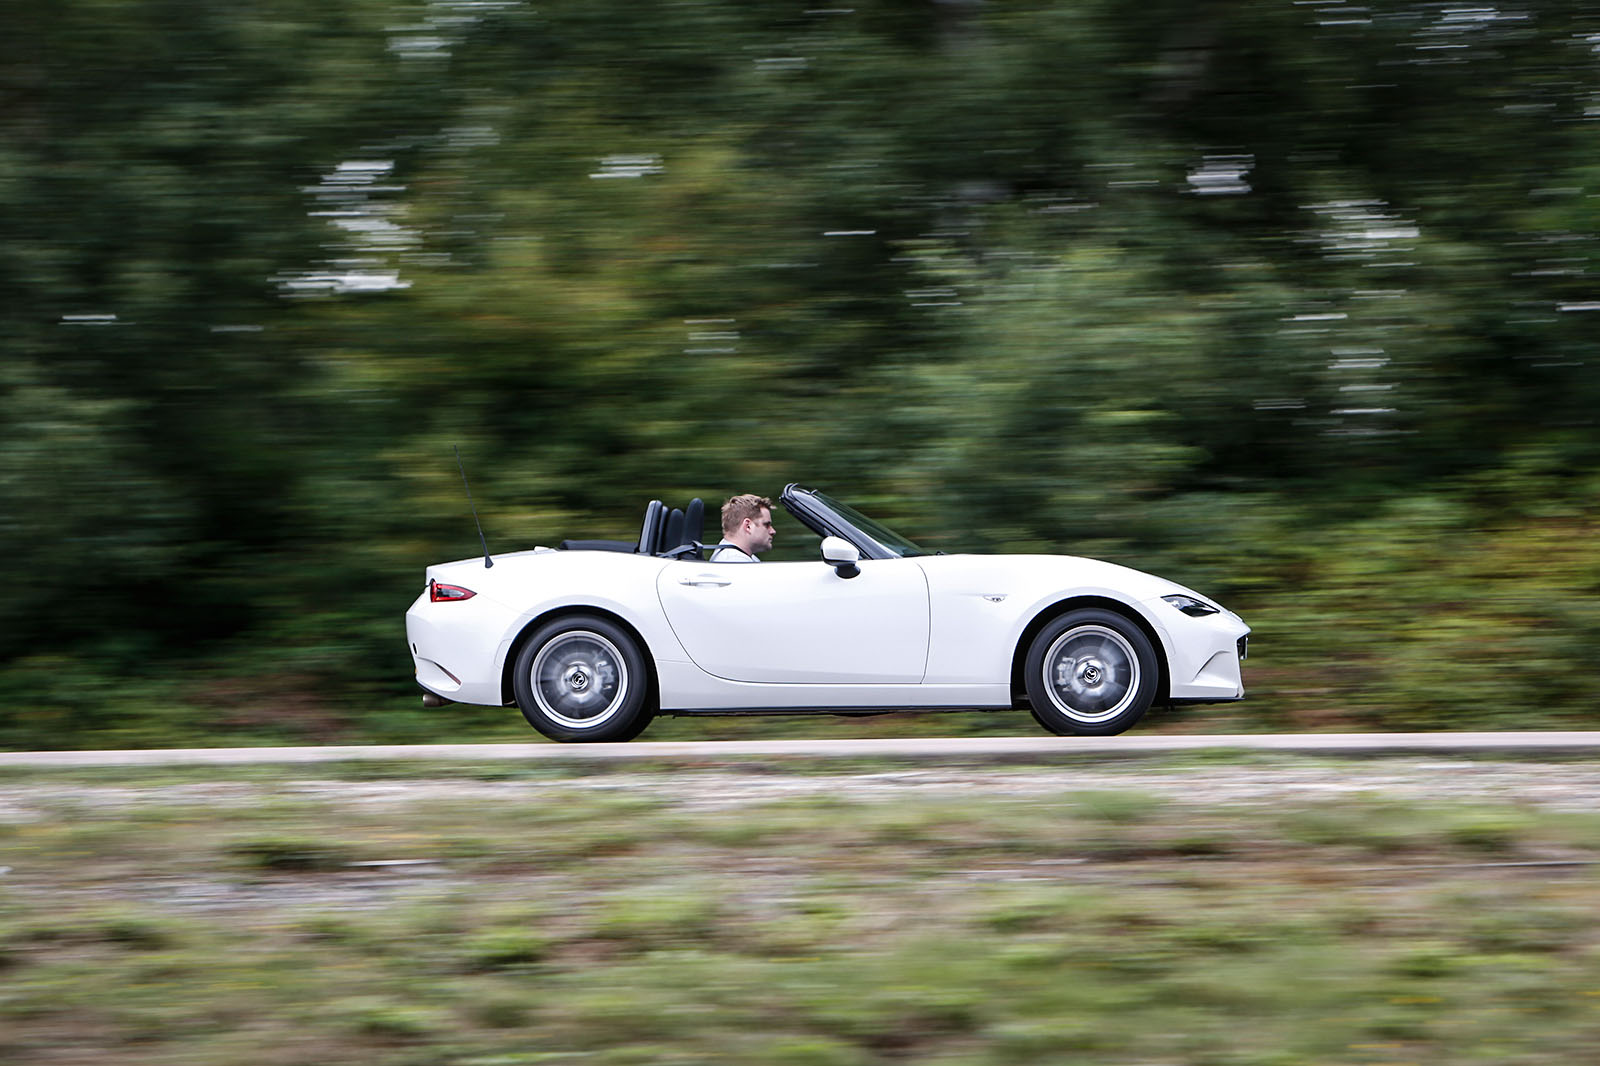 Caterham, Lotus and Ariel's best would struggle to match the Mazda MX-5's offering